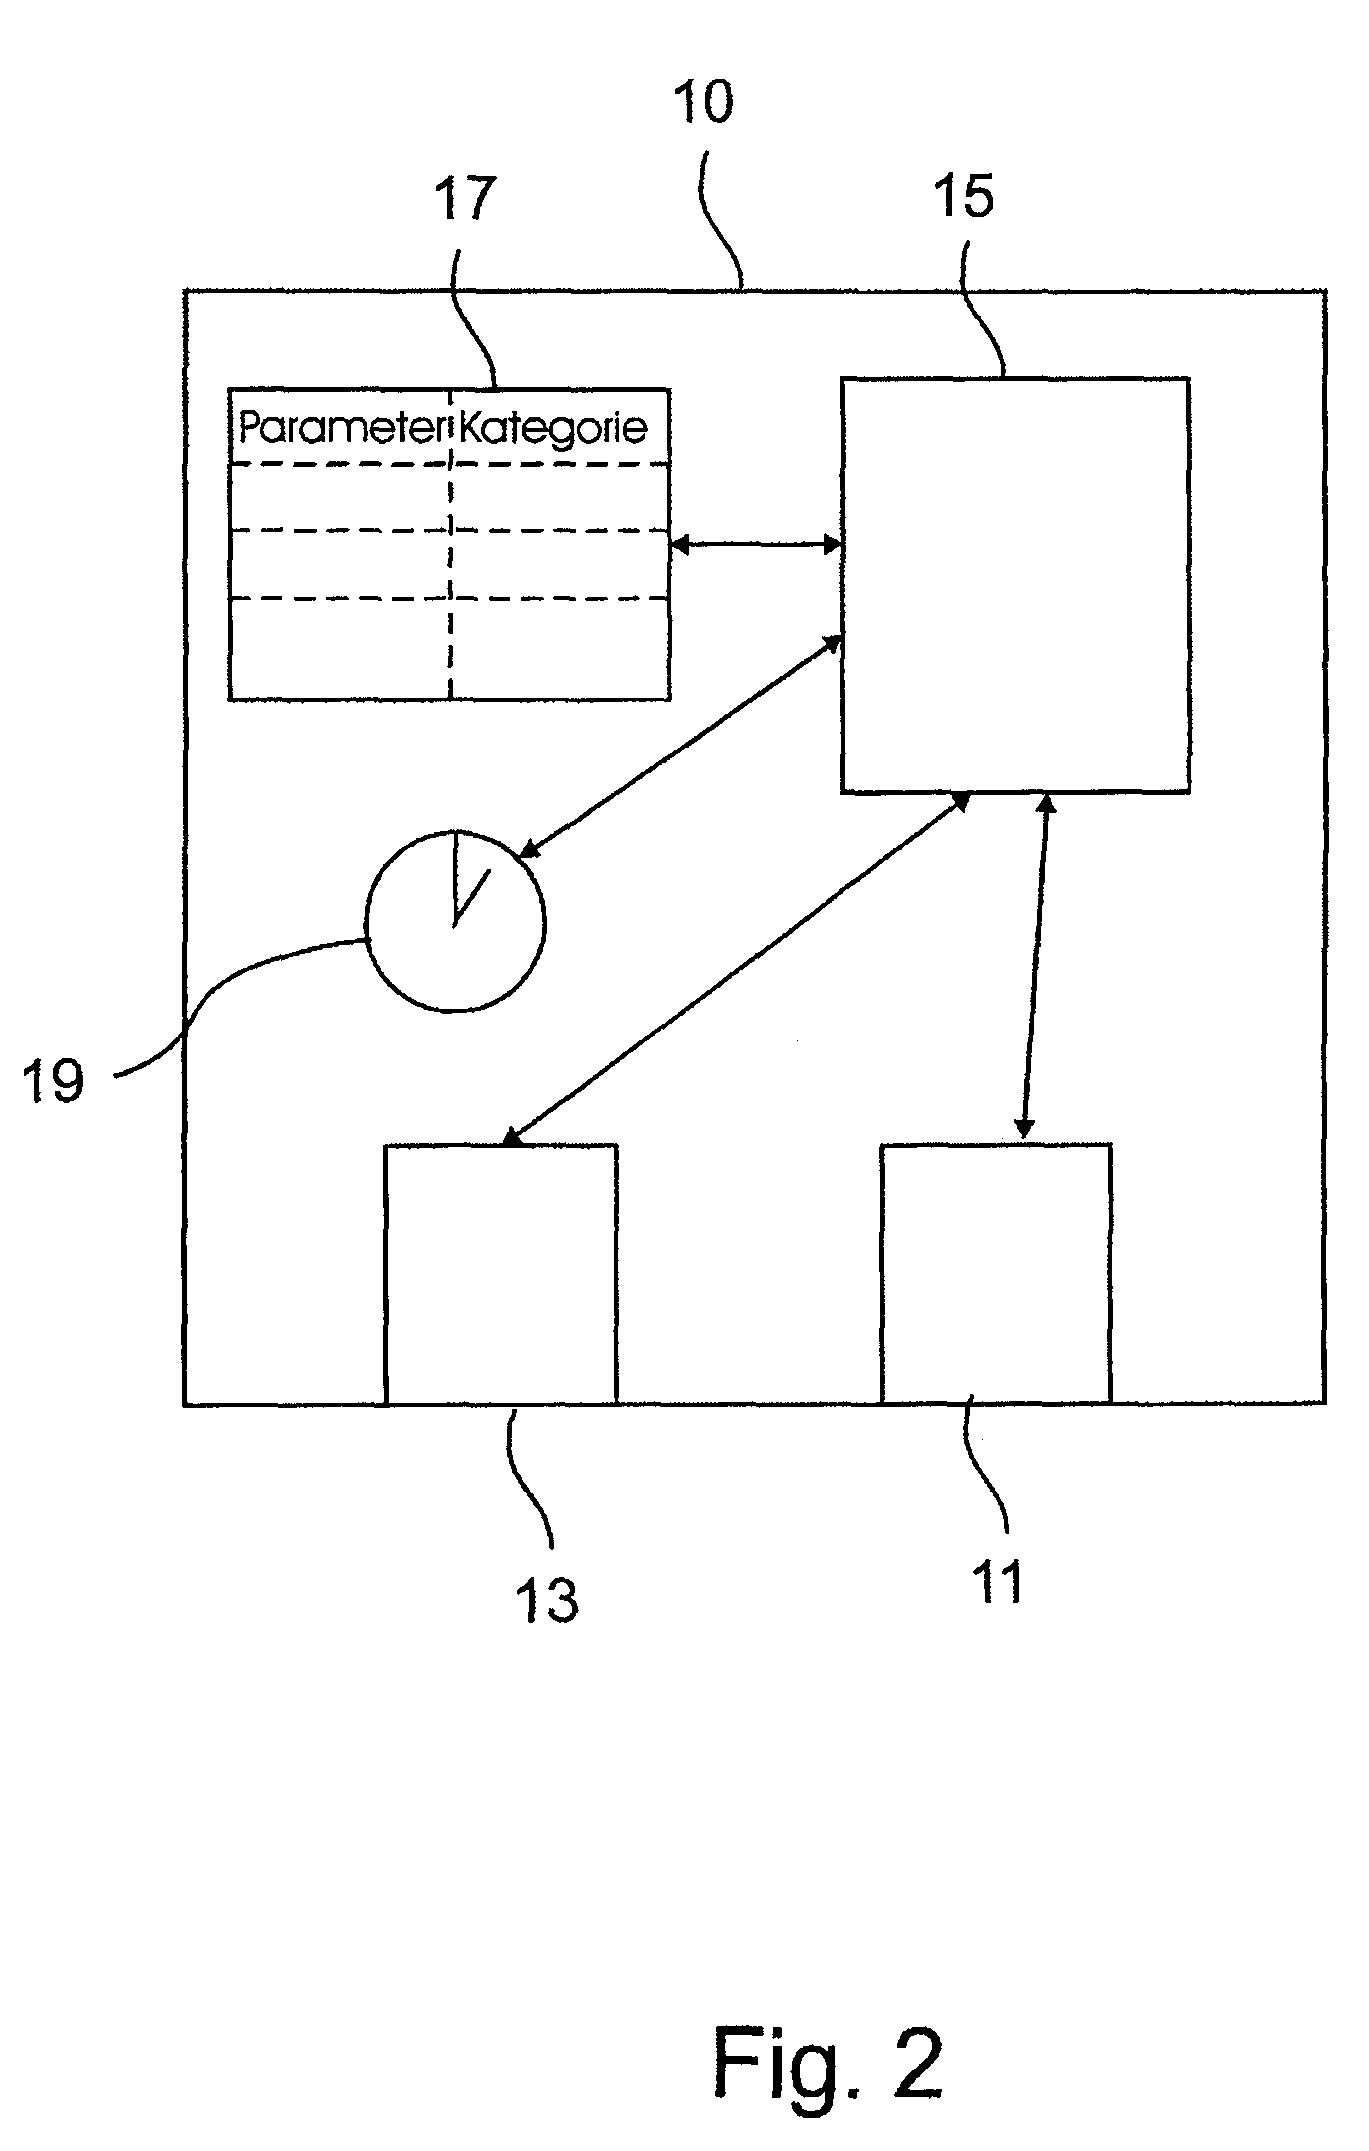 Method for secure reprogramming of clinically relevant parameters as part of remote programming of an electronic implant